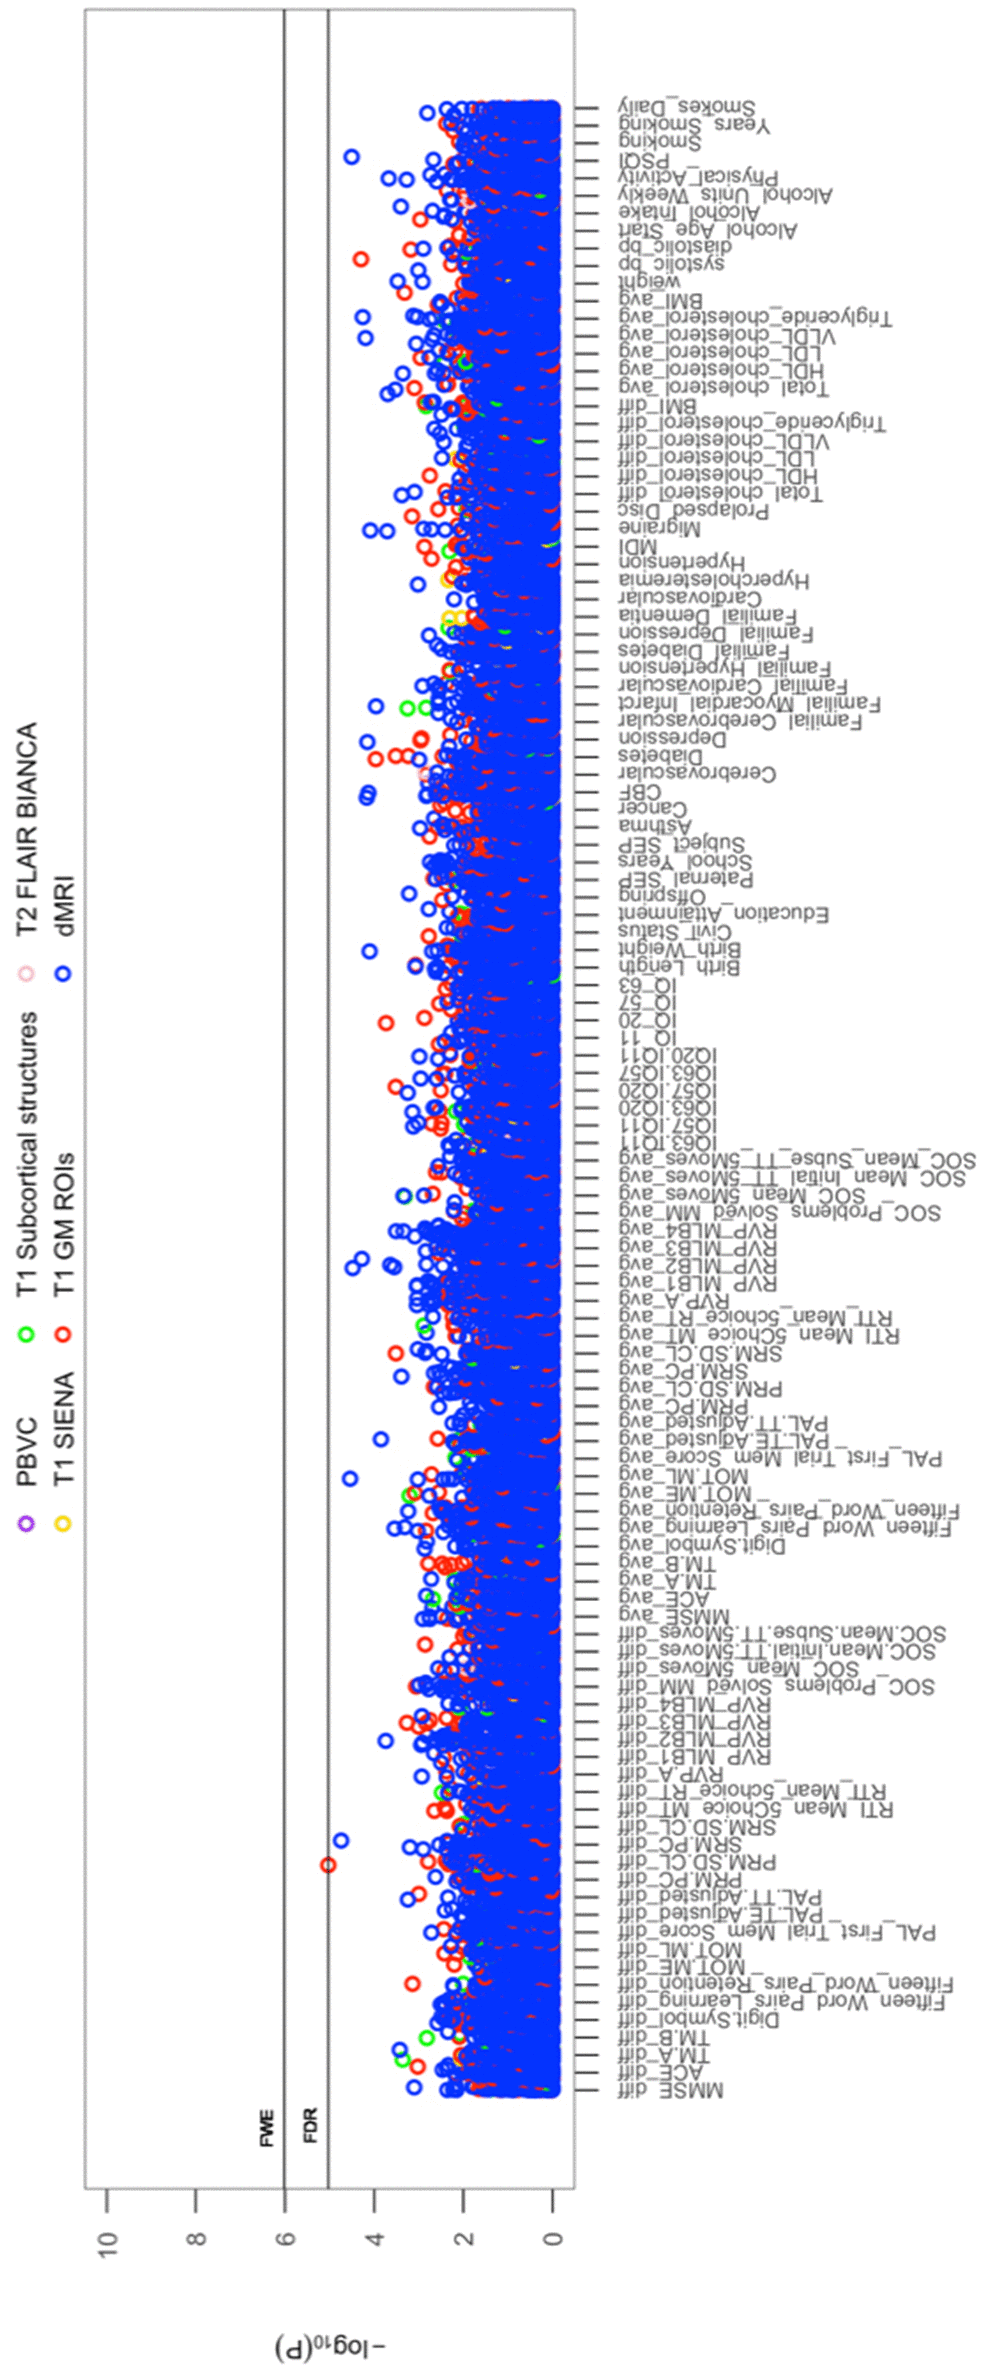 The significance of associations between IDP and behavioural variables, for longitudinal correlations. The Manhattan plot shows all results for 454 IDPs against each of the 114 behavioural (51,756 values) adjusted for confounders: age, motion, and head size. Significance is plotted as -log 10 p-values, arranged by behavioural measures on the x-axis, multiple testing thresholds across all pairwise associations are marked with a horizontal line (FWE: 6.01 x 10-6; FDR: 5.03 x 10-5). IDPs are distinguished by plotting colour, determined by MRI modality and image processing tool applied to derive each measure. This created 6 imaging subdomains: 1) T1w percentage brain volume change (PBVC) modelled by SIENA 2) T1w global brain volume measures (normalized and unnormalized for head size) modelled by SIENAX (yellow), 3) T1w subcortical structures (shapes and volumes) modelled by FIRST (green), 4) T1w total grey matter volume within grey matter region-of-interests using partial volume estimates derived from FAST (red), 5) T2w-FLAIR total volume of white matter hyperintensities modelled by BIANCA (pink), 6) dMRI estimates of diffusivity measures contained within 48 standard-space WM tract region-of-interests modelled by TBSS (blue). Abbreviations: IQ-11, IQ-20, IQ-57, IQ-63 = general intelligence score ages ~11, ~20, ~57, and ~63; MOT = motor task; ME = mean error; ML = mean latency; PAL = paired associates learning; TE adjusted = total errors adjusted; TT Adjusted = total trials adjusted; PRM = pattern recognition memory; SD = standard deviation; CL = correct latency; RTI = reaction time task; MT = movement time; RT = reaction time; RVP = rapid visual processing task; MLB1-4 = mean latency block 1 to 4; SOC = Stockings of Cambridge; Mean Initial TT 5 Moves = mean initial total time 5 moves task; Mean Subse TT 5 Moves = mean subsequent thinking time 5 moves task; SRM = spatial recognition memory; TM = trail making task; SEP = social economic position; MDI = Major Depression Inventory; CBF = cerebral blood flow; PSQI = Pittsburgh Sleep Quality Index.